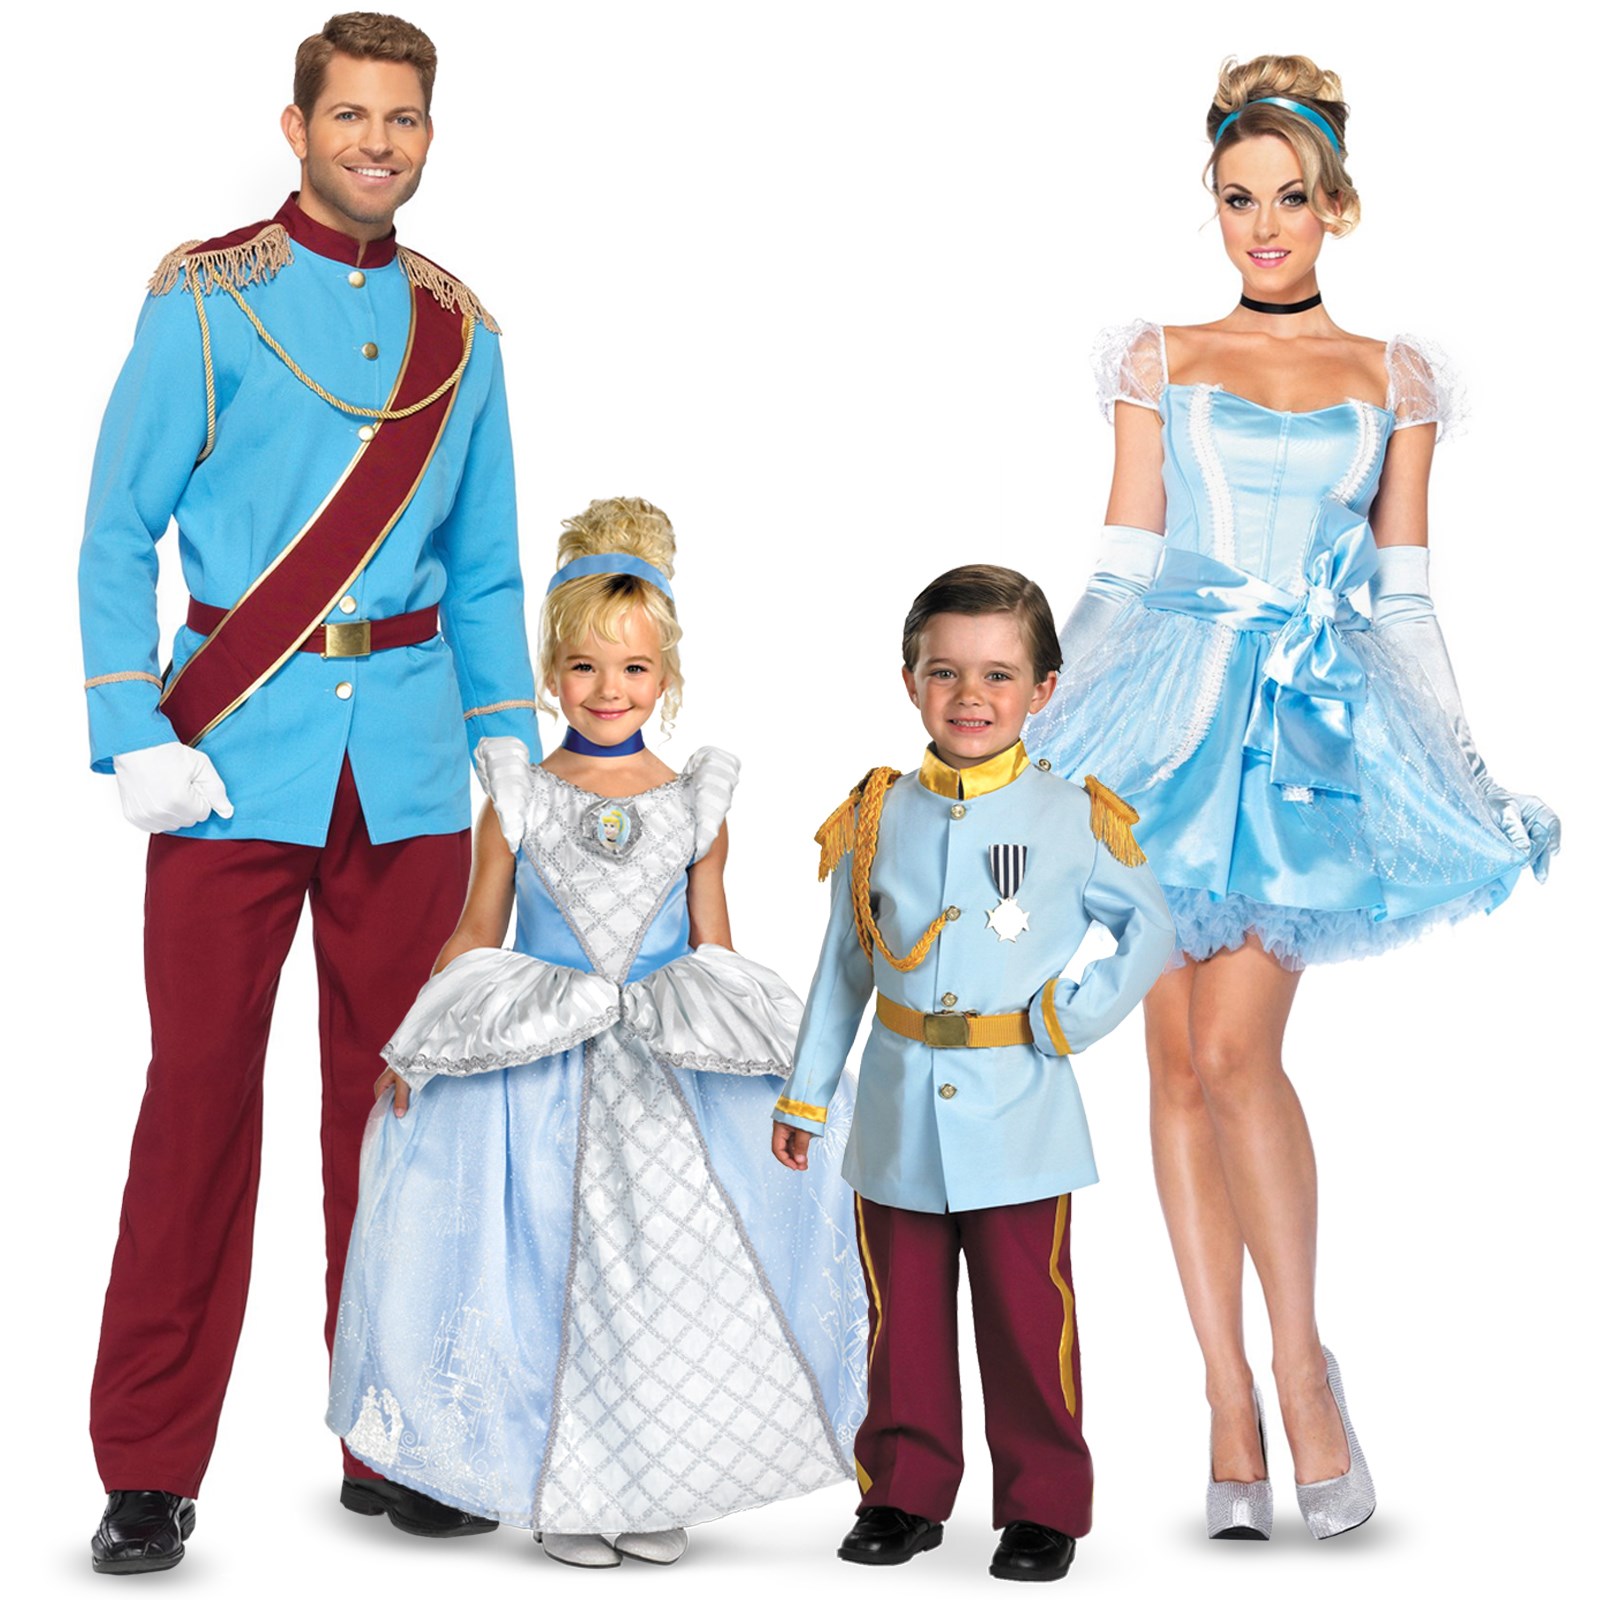 Fairytale & Storybook Group Costumes